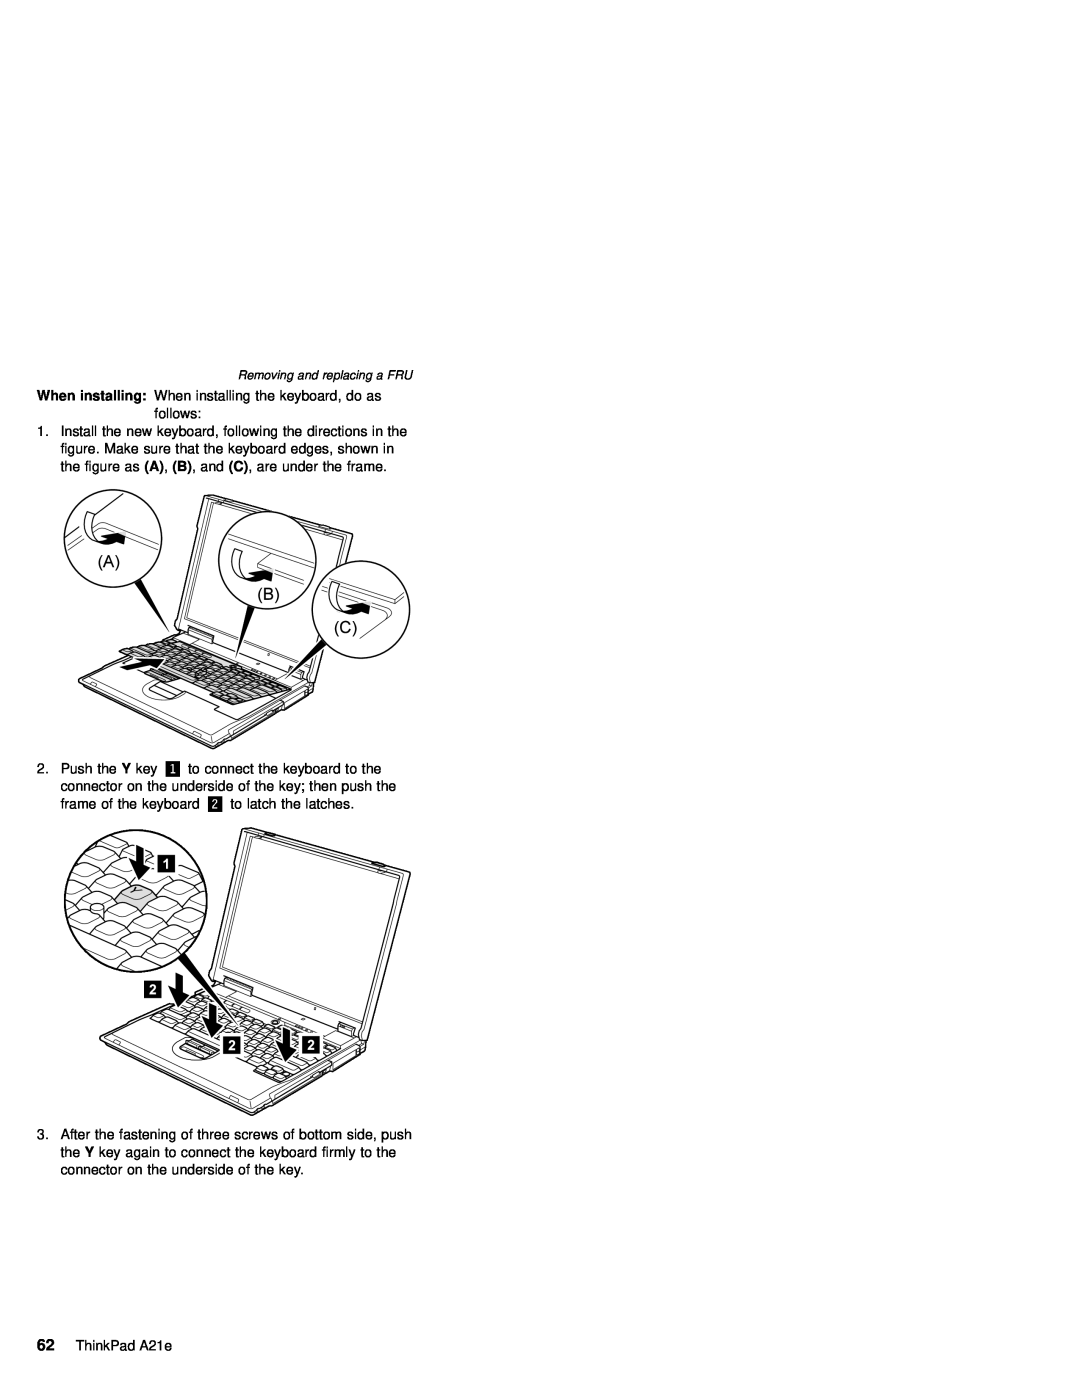 IBM MT 2632 manual When installing When installing the keyboard, do as follows 